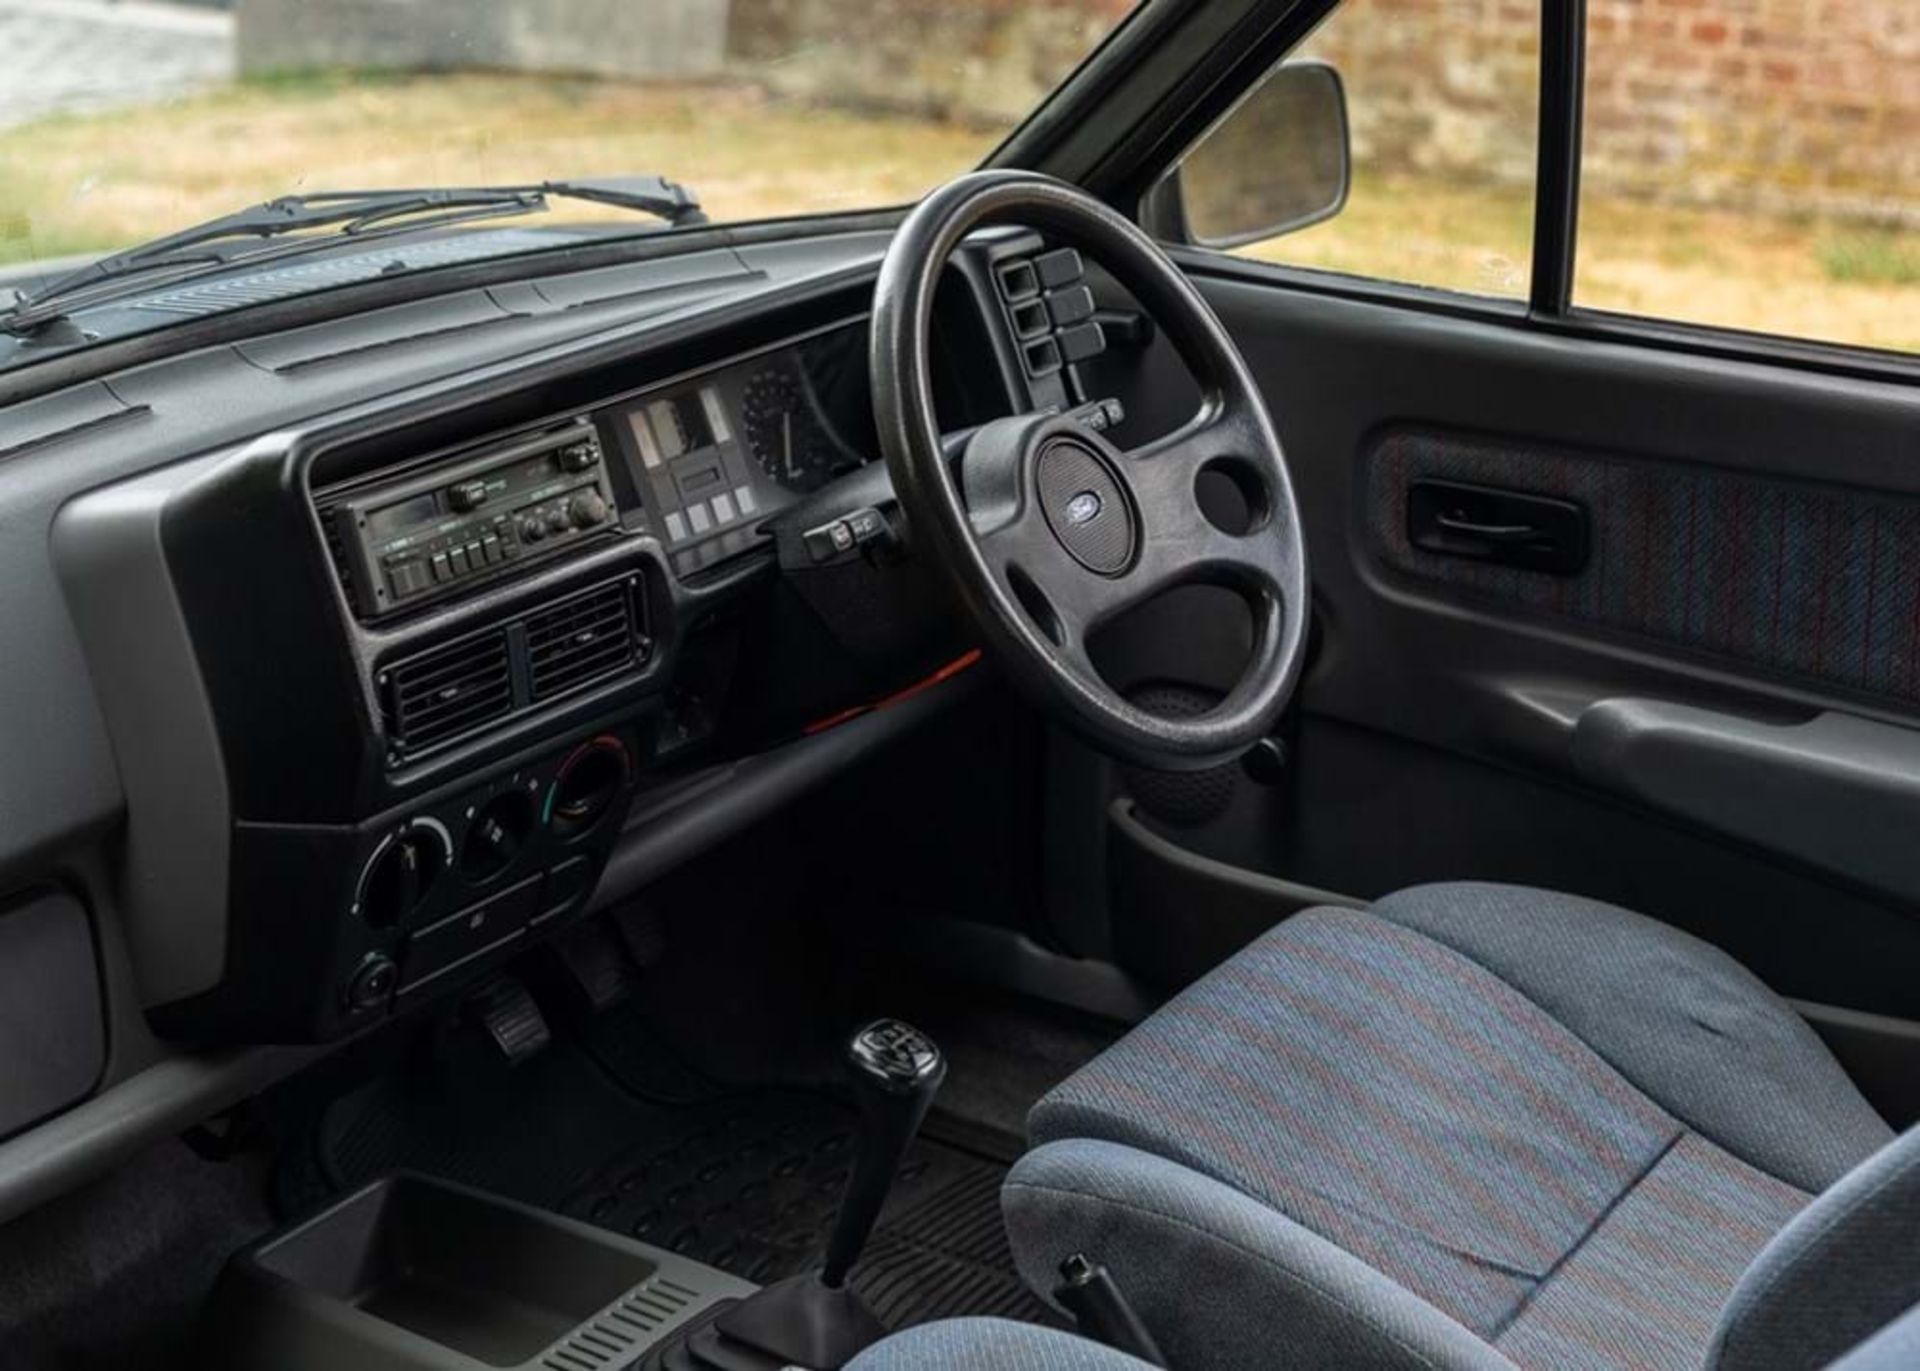 1988 Ford Fiesta XR2 - Image 4 of 10